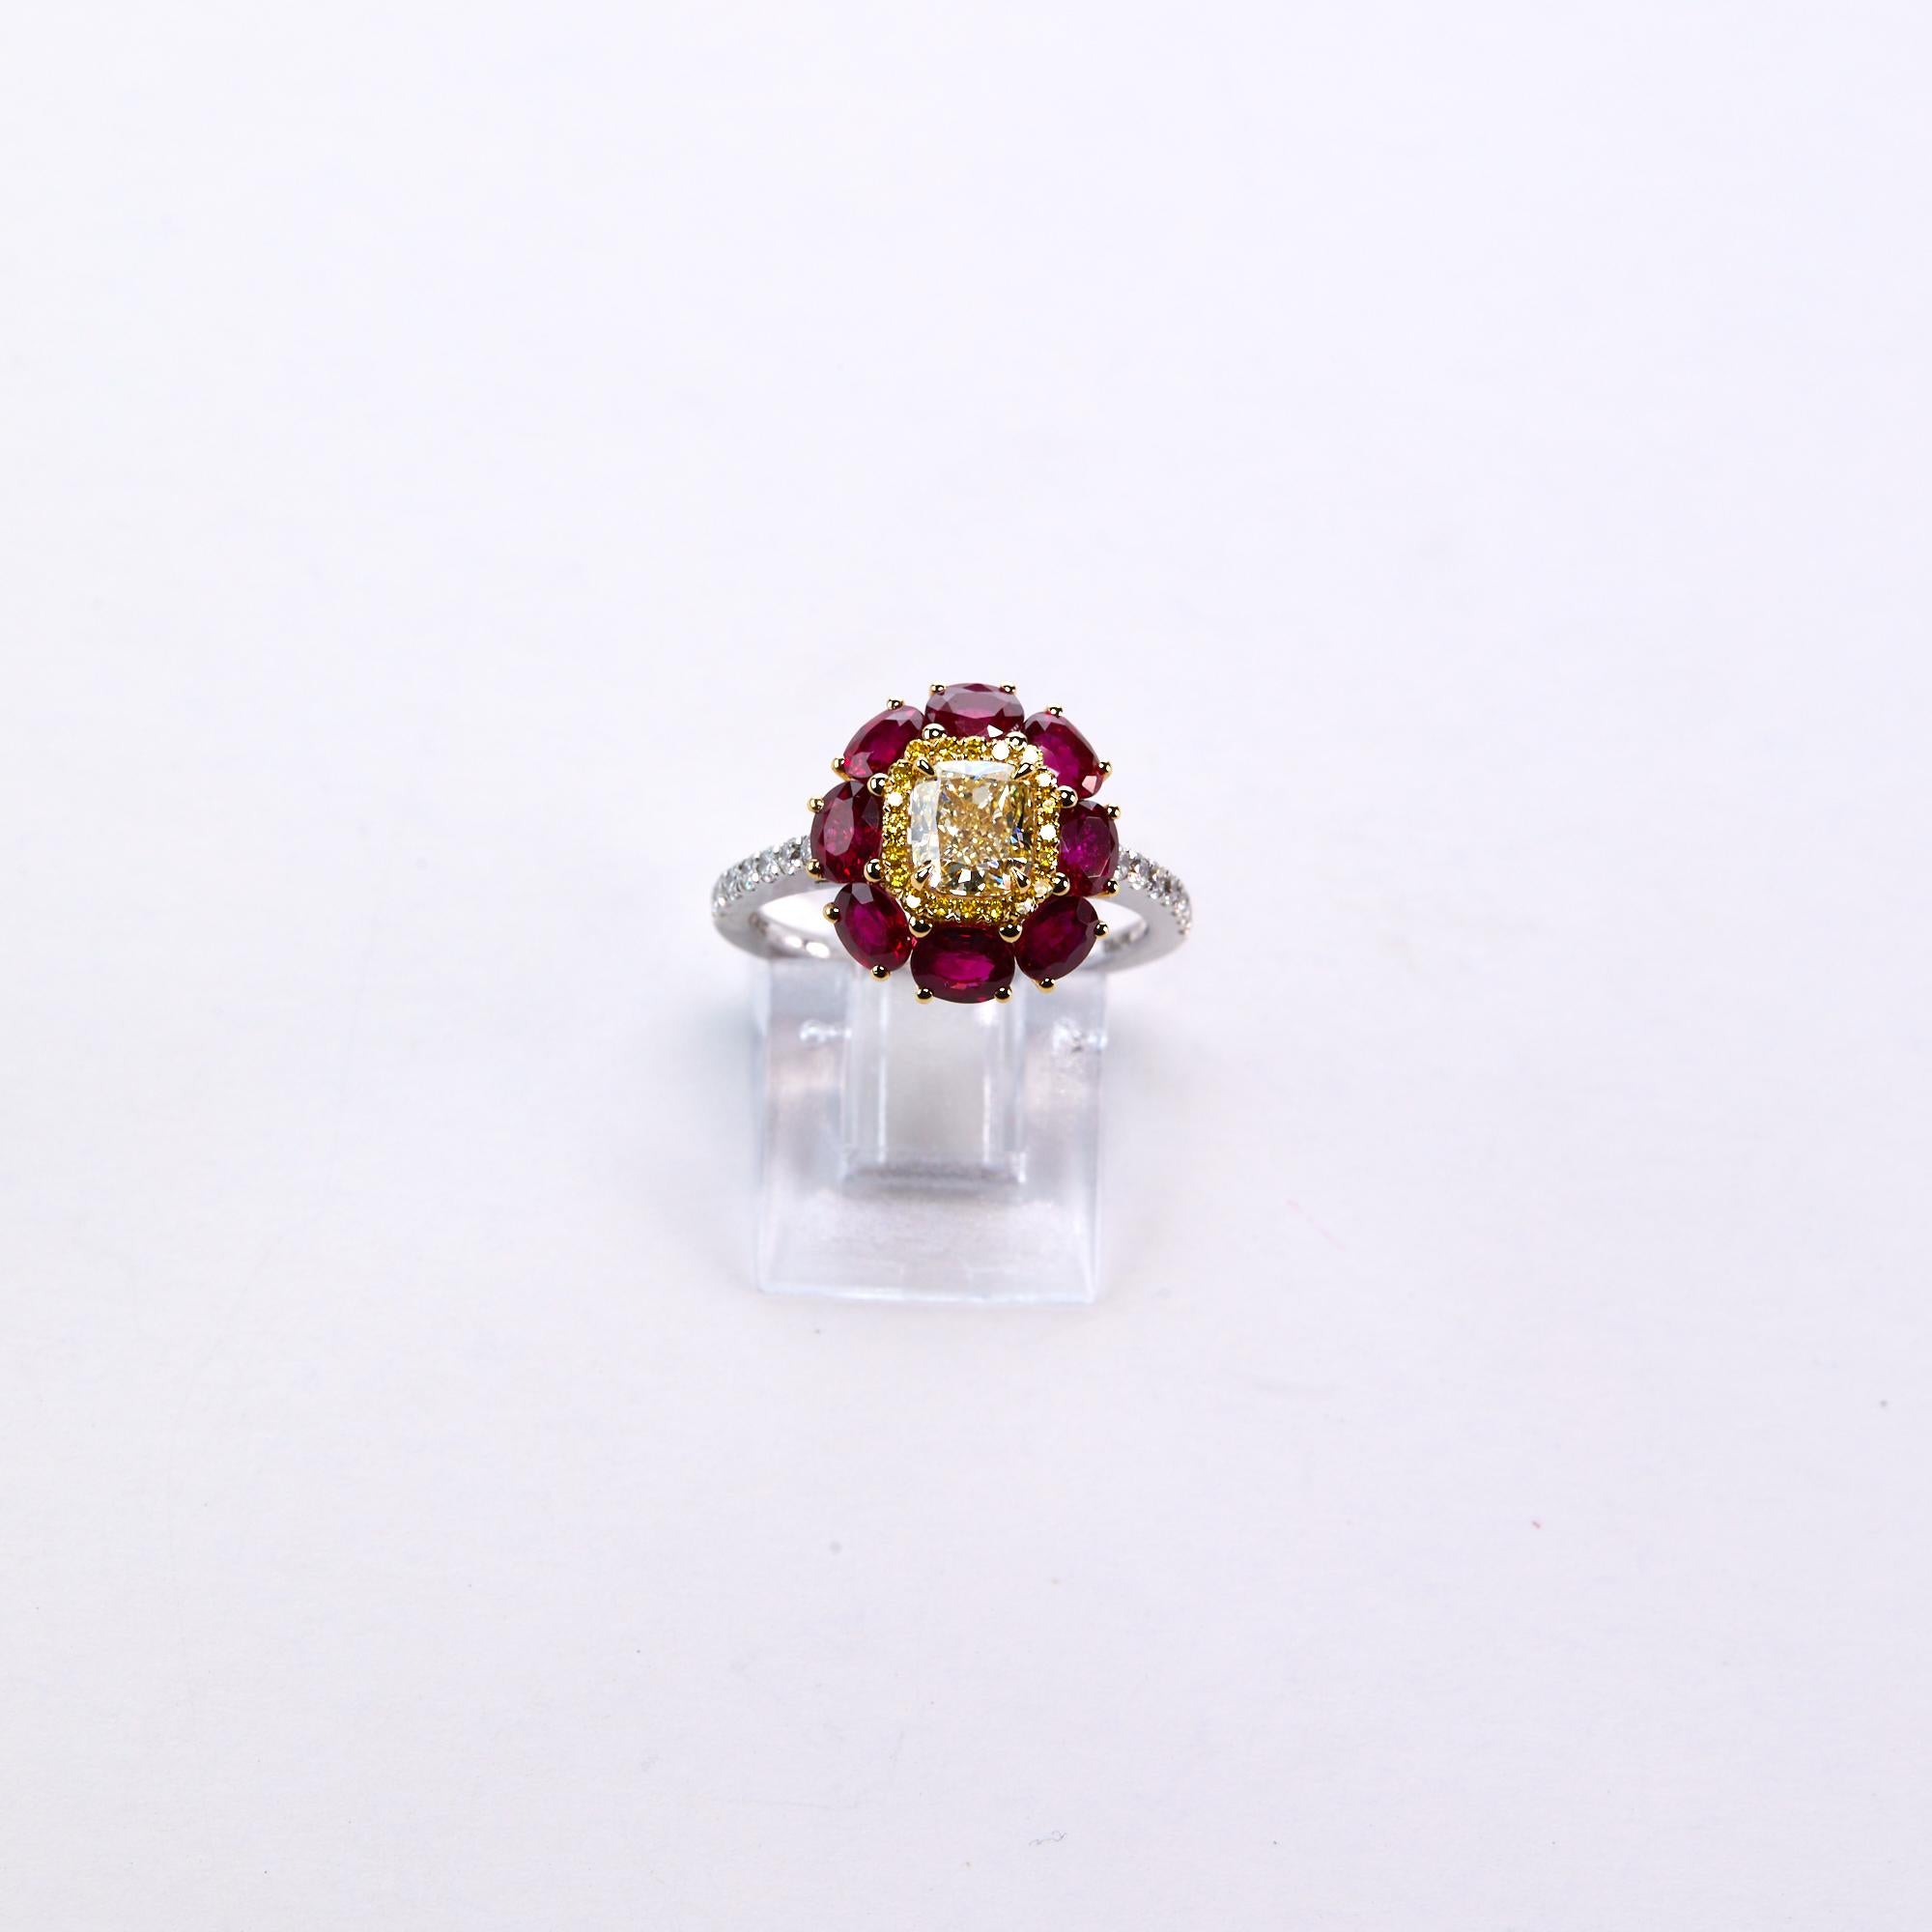 Certified Fancy Yellow And Ruby Engagement Ring. This beautiful Italian design combines 2.26 carats of oval shaped rubies with a vibrant .91 certified Fancy Yellow Cushion Cut as the center stone and .23 carats of round brilliant diamonds for the